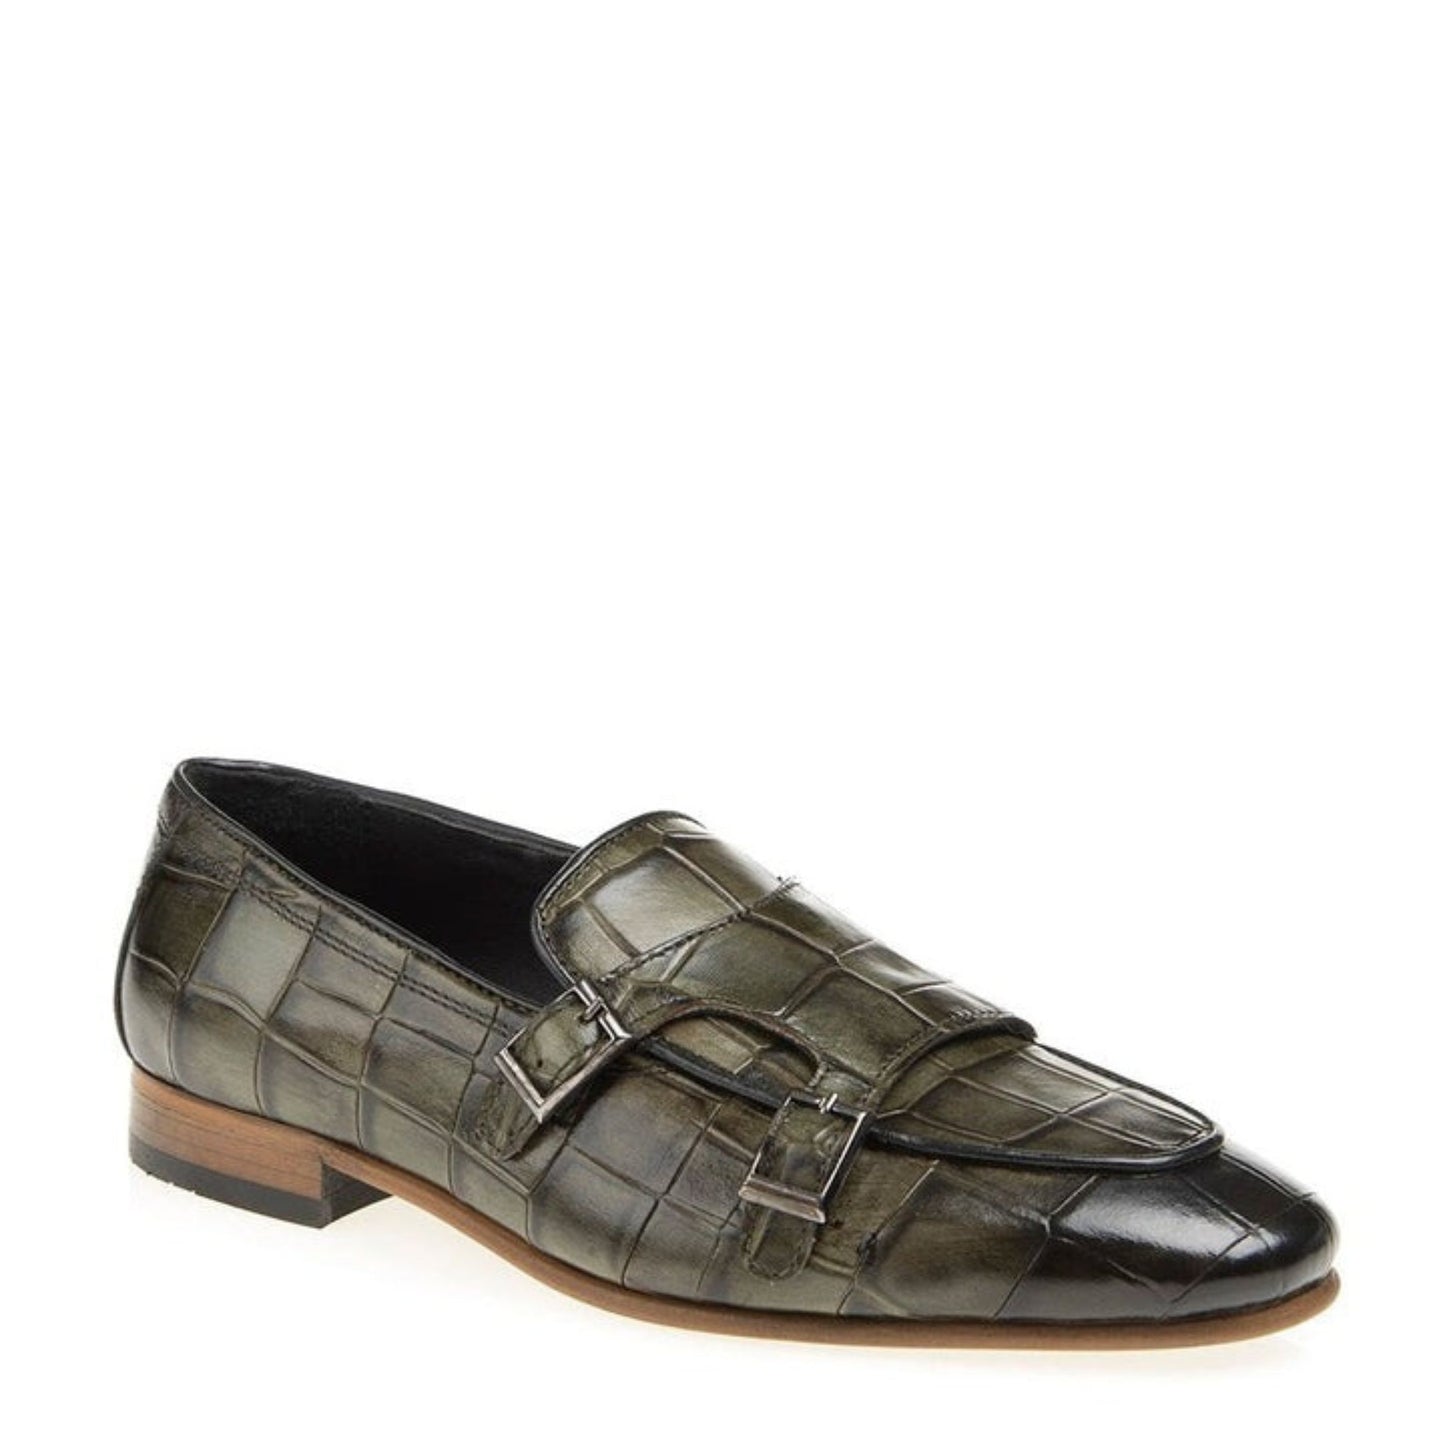 Madasat Green Leather Loafer - 703 |